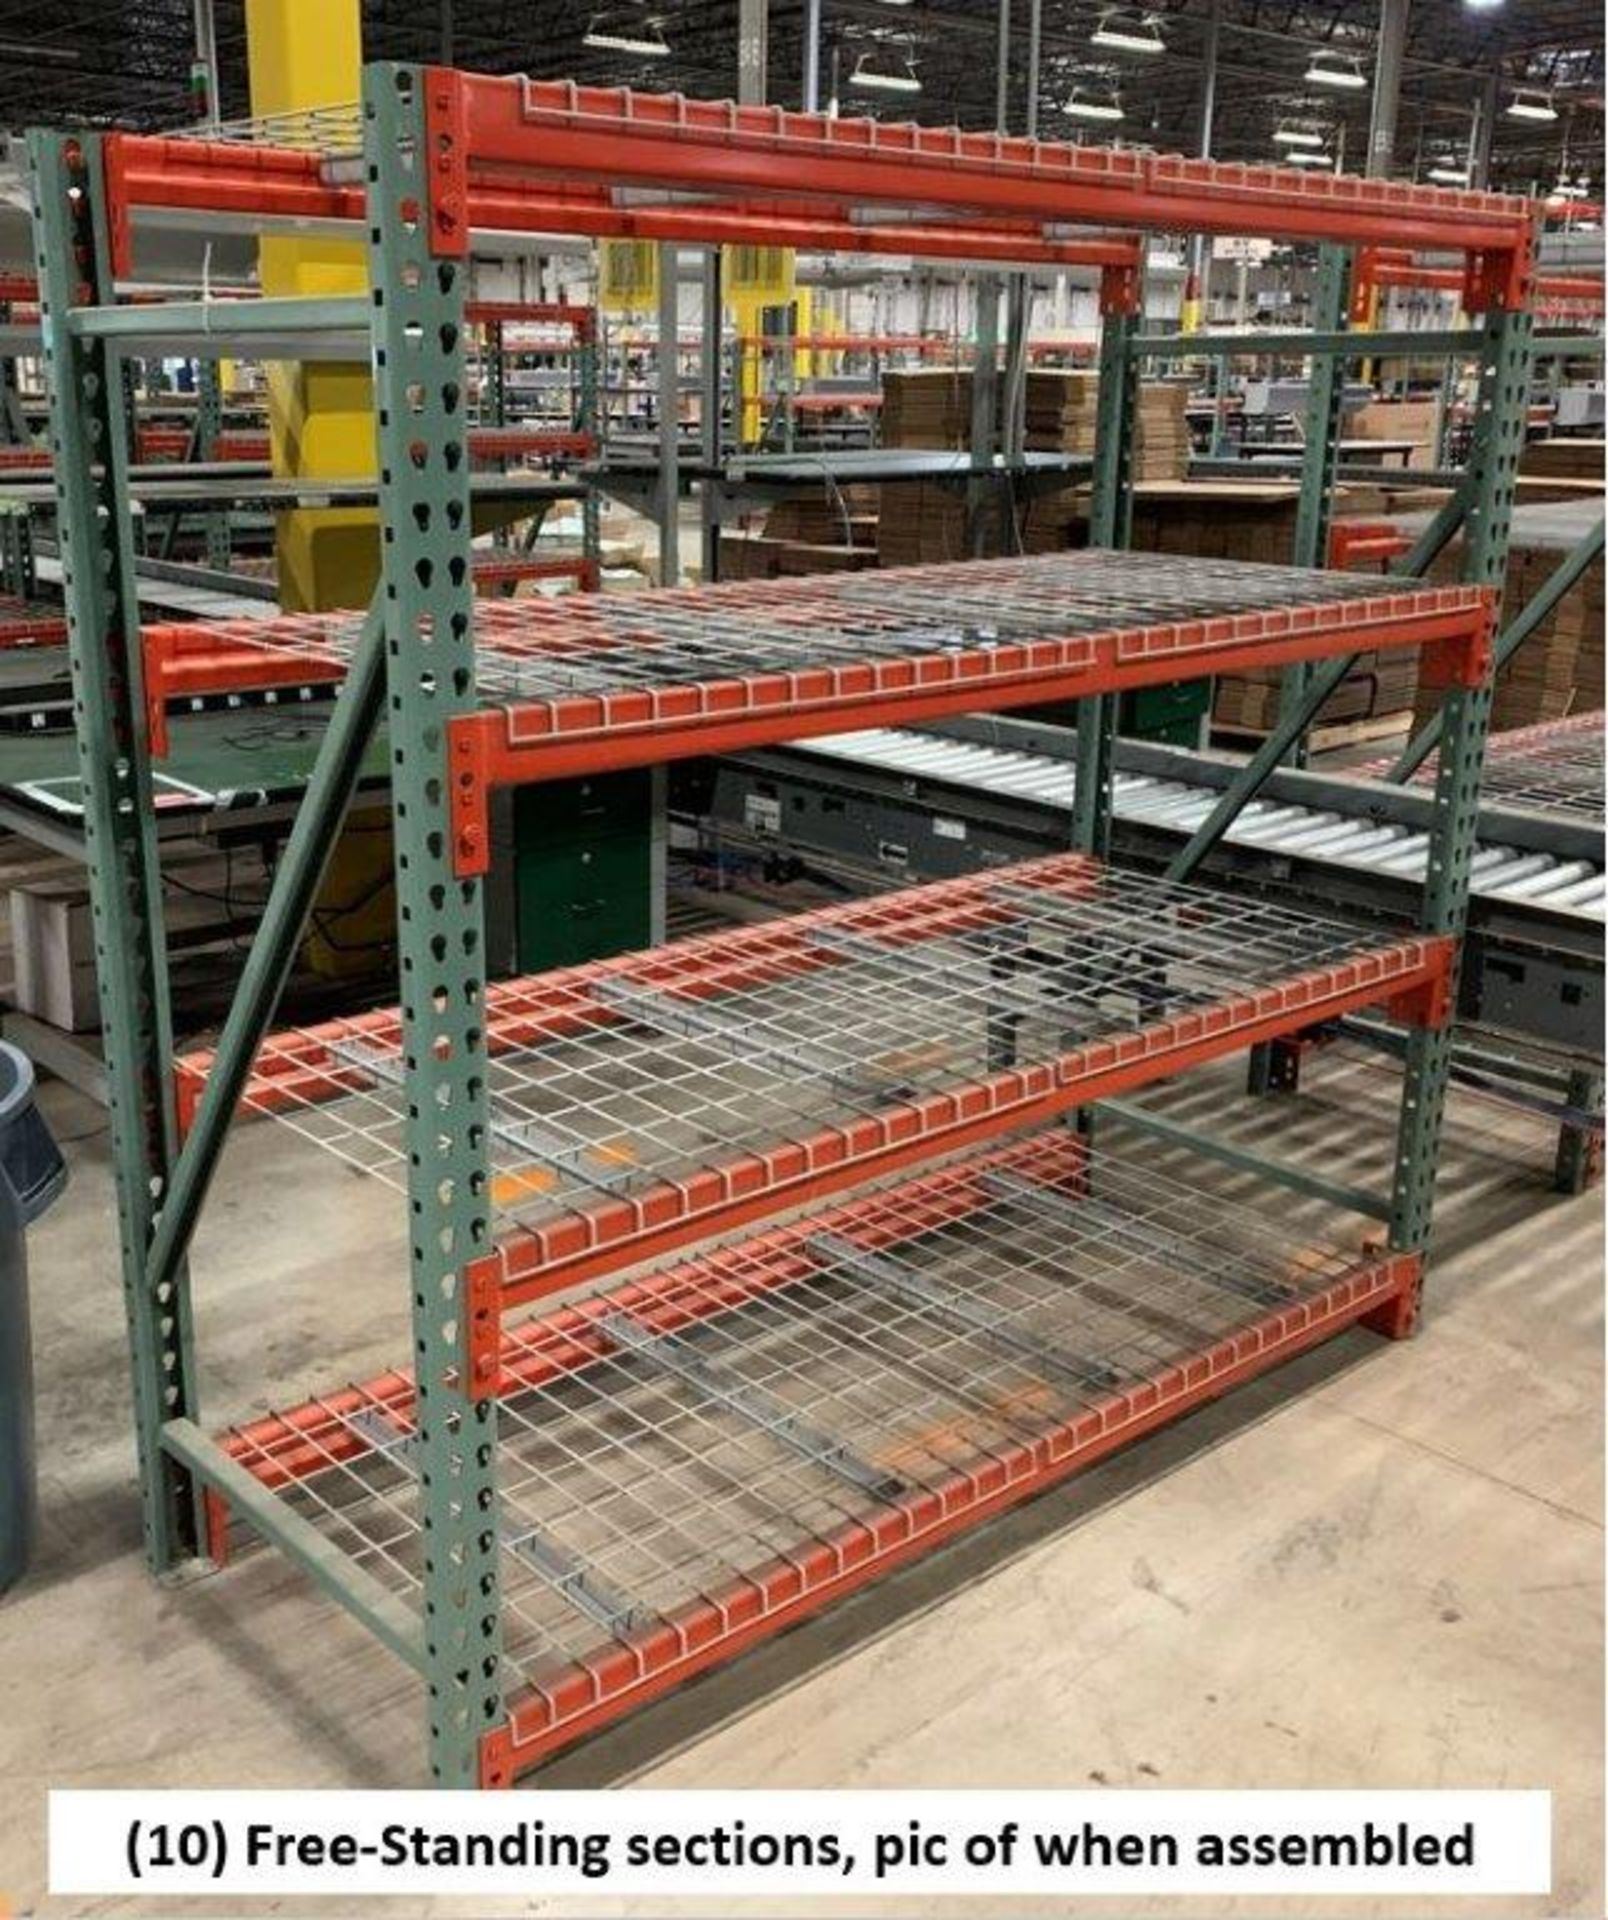 FREE-STANDING SECTIONS 30" X 72" X 72" HIGH ADJUSTABLE BEAM WIRE DECK PALLET RACK CONSISTING OF - Image 2 of 6